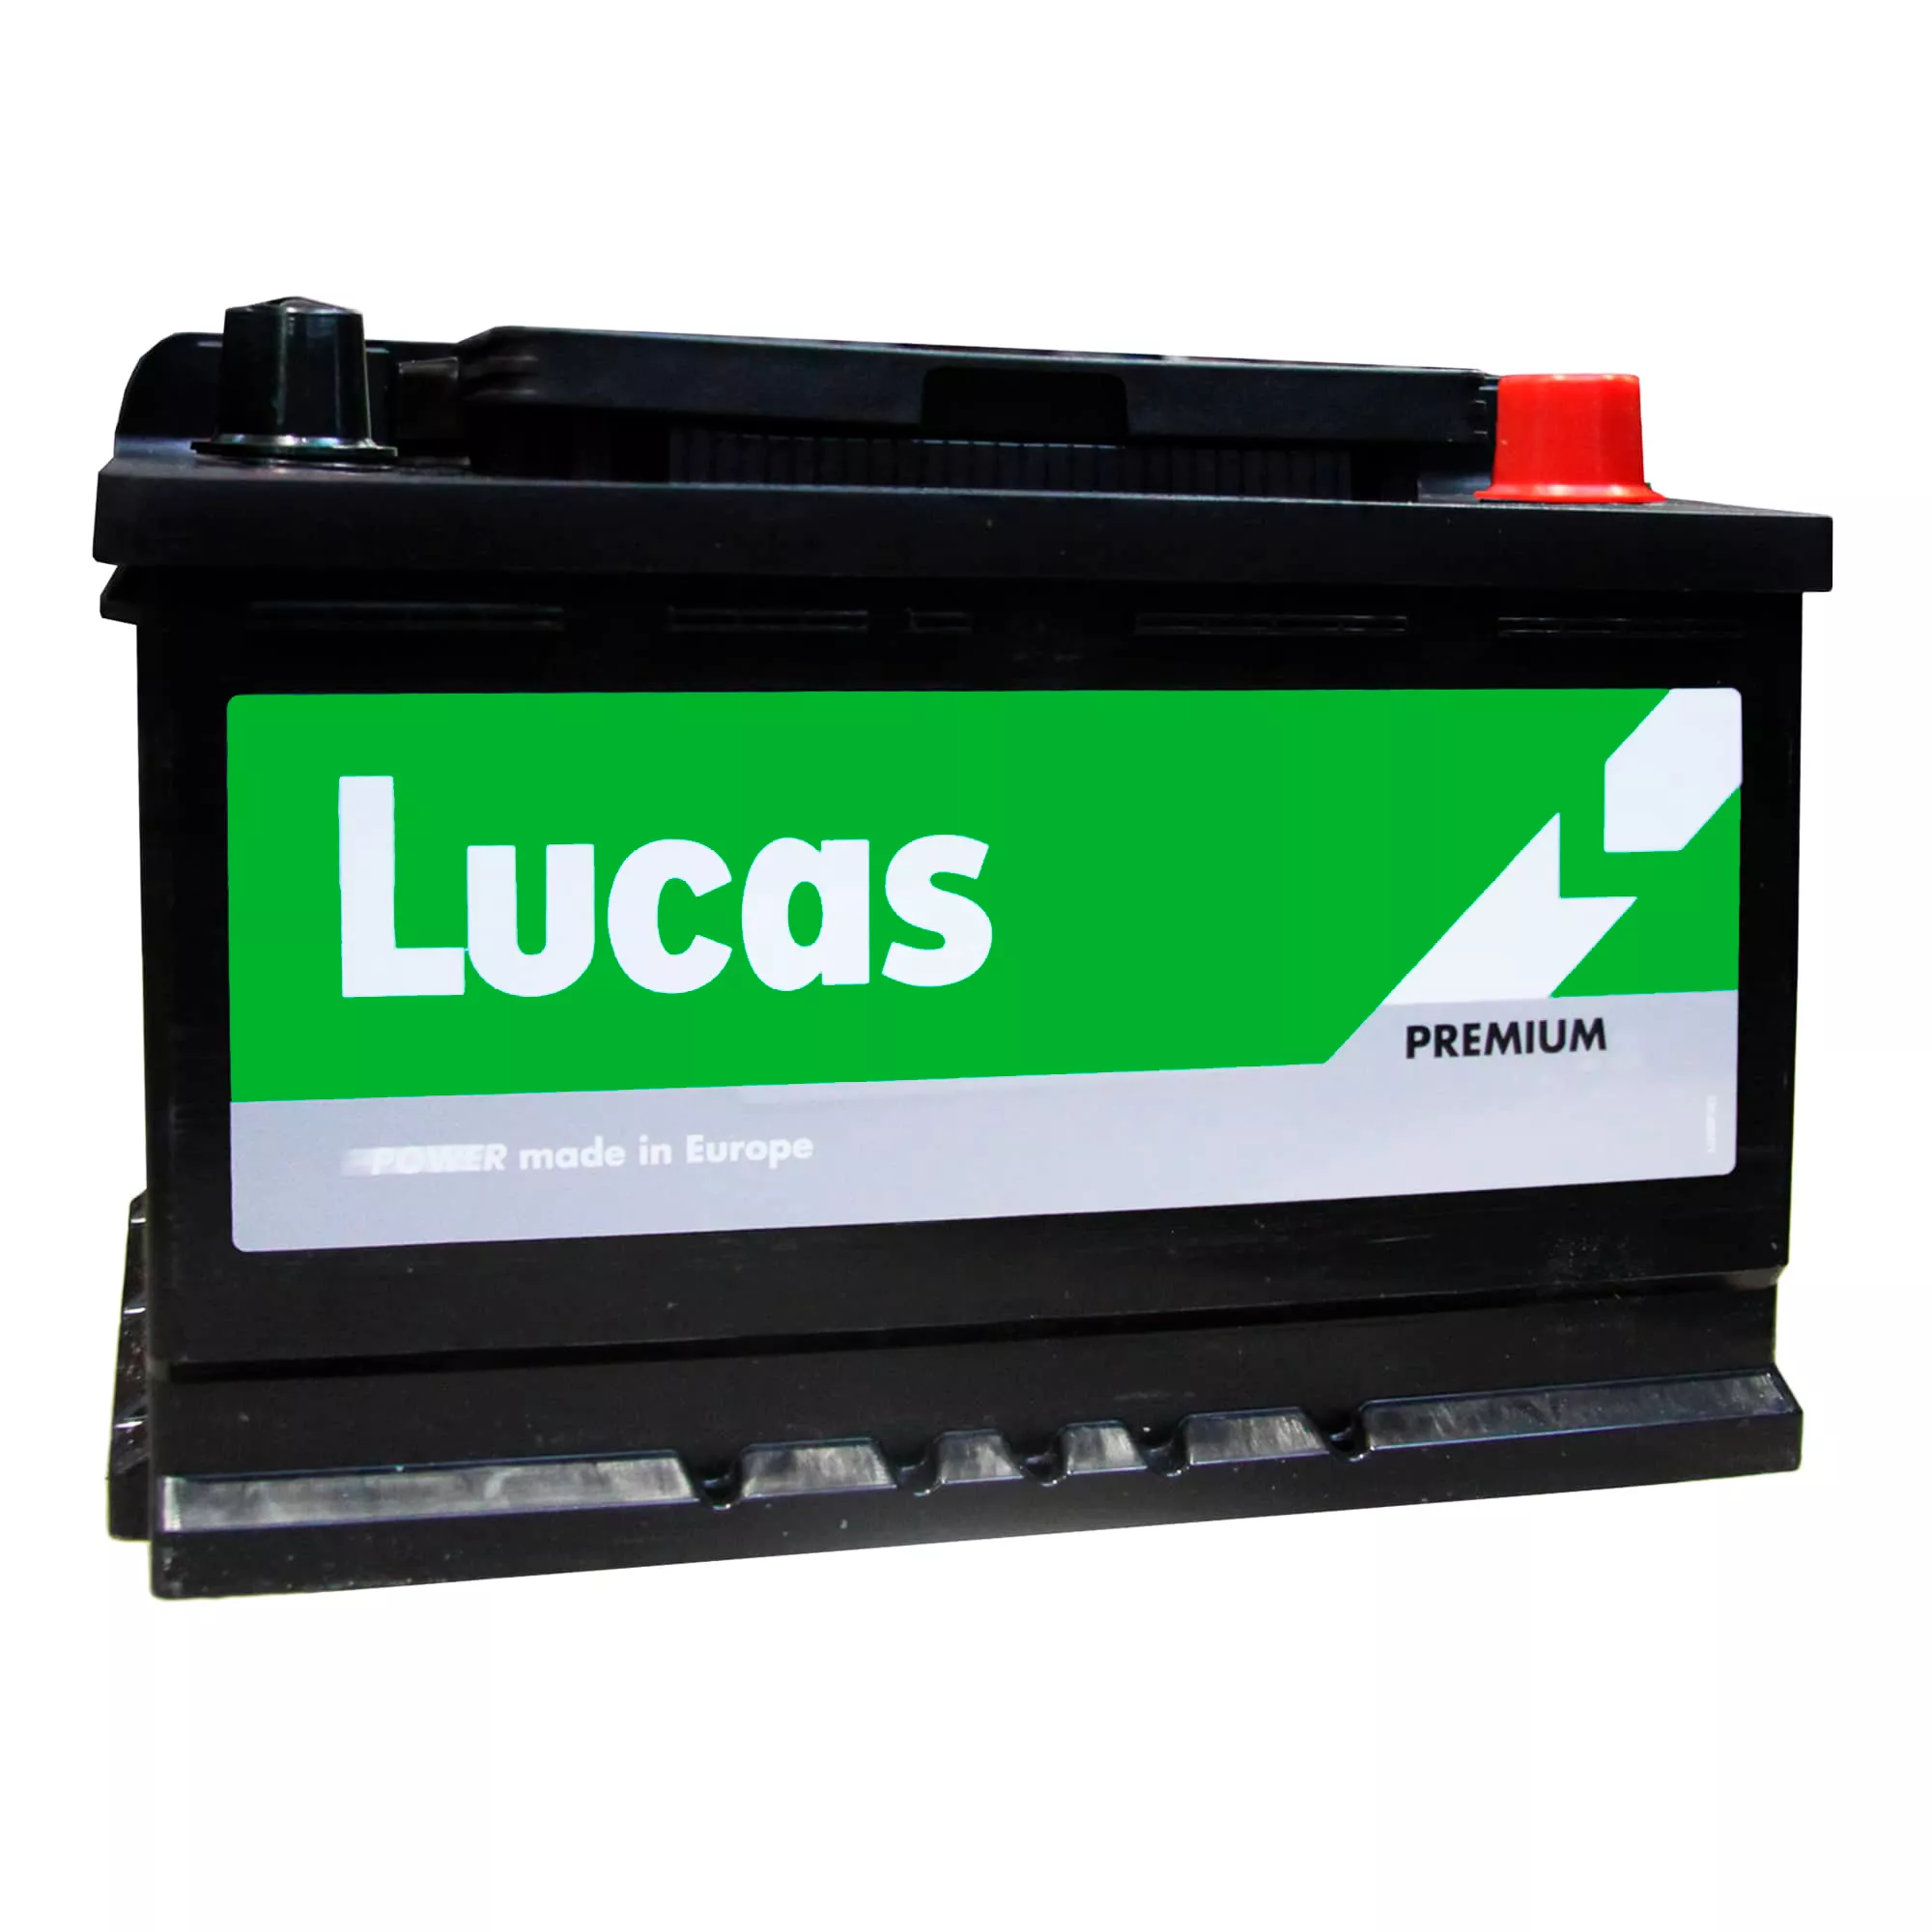 Акумулятор Lucas (Batteries manufactured by Exide in Spain) 6CT-74 АзЕ (LBM007A)